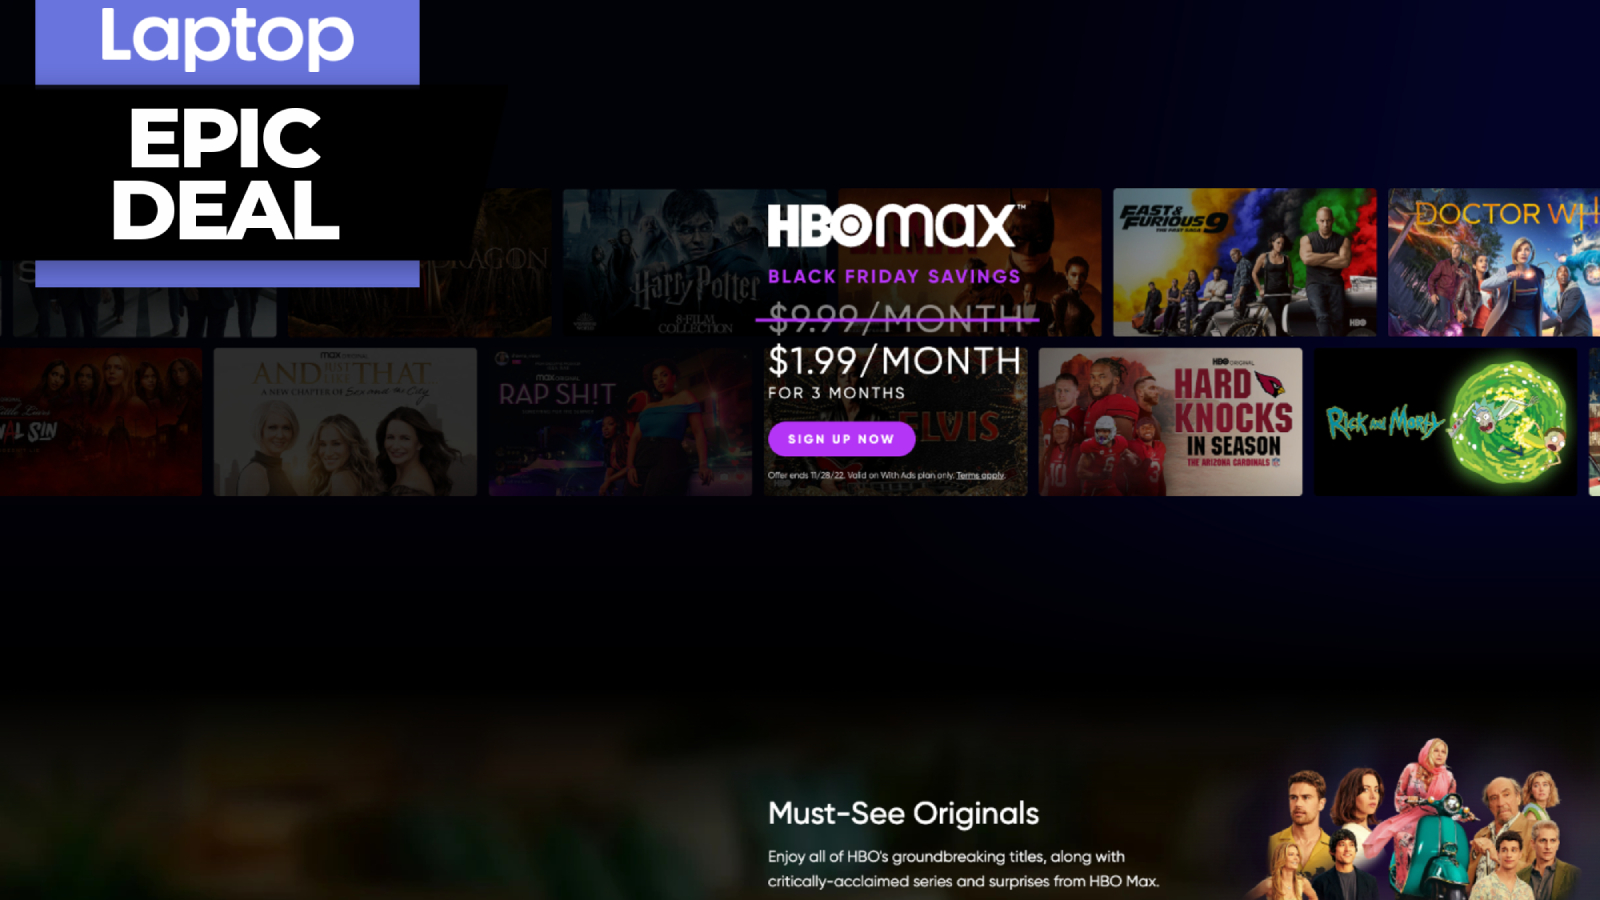 HBO Max is only 1.99 a month in Black Friday deal — how to get it